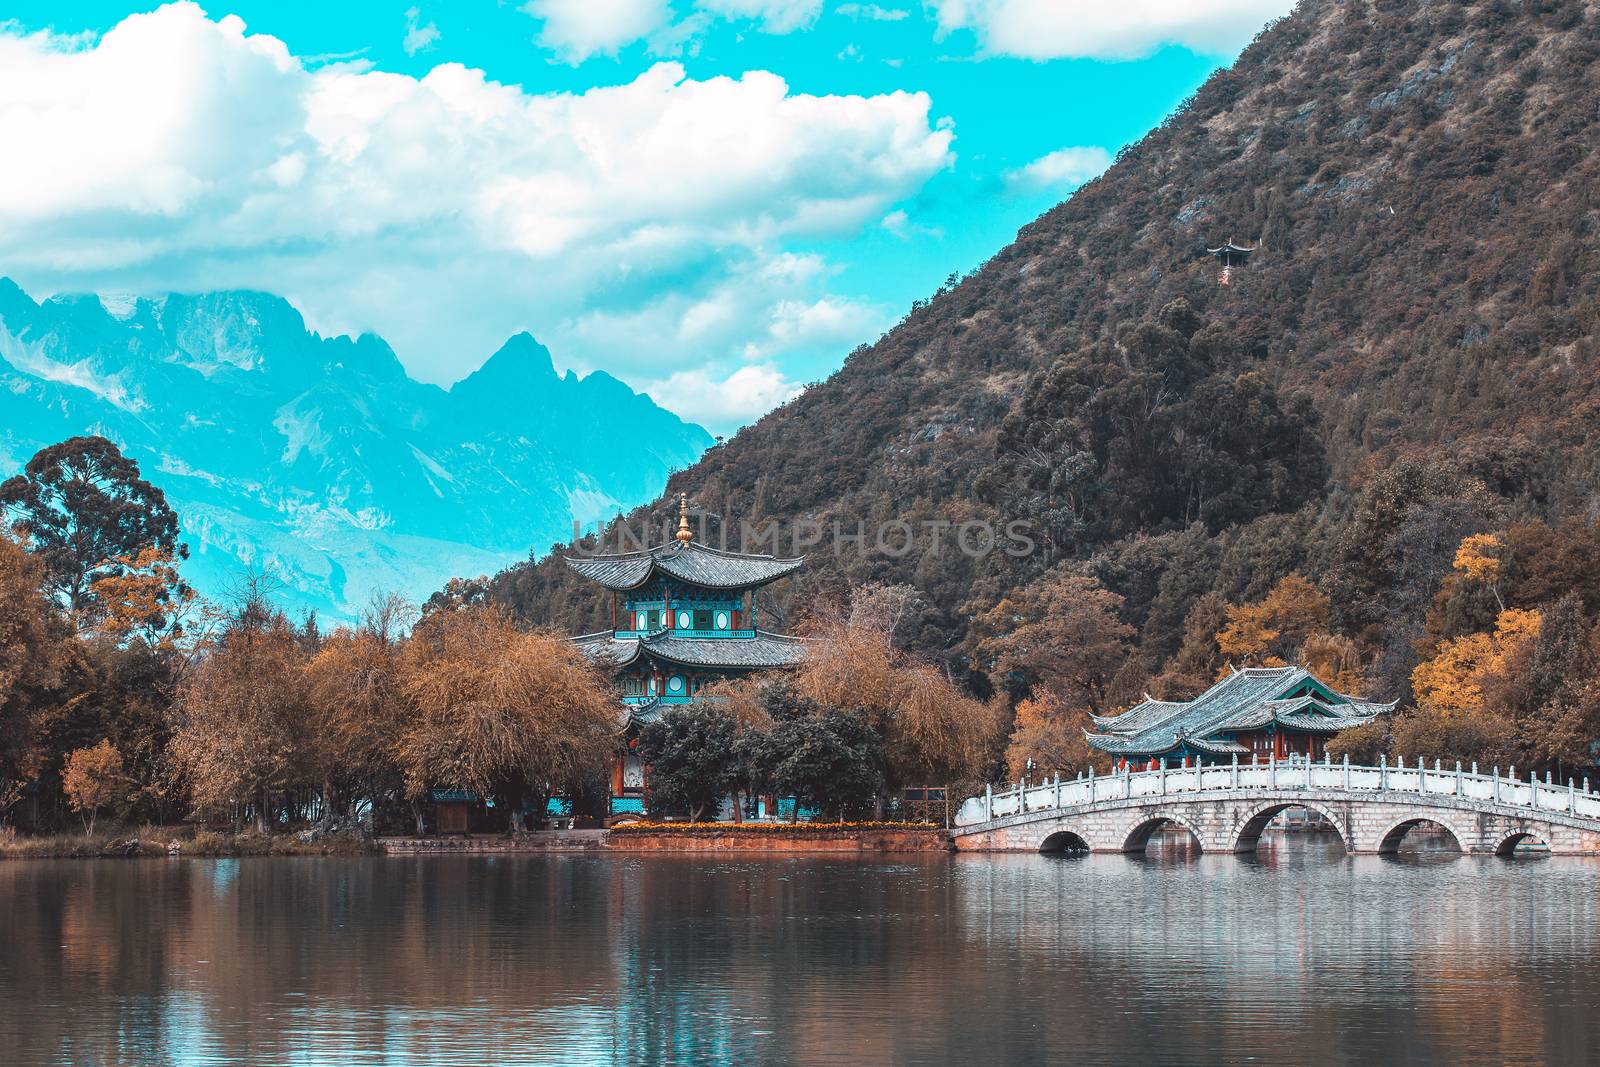 Beautiful view of the Jade Dragon Snow Mountain and the Suocui Bridge over the Black Dragon Pool in the Jade Spring Park, Lijiang, Yunnan